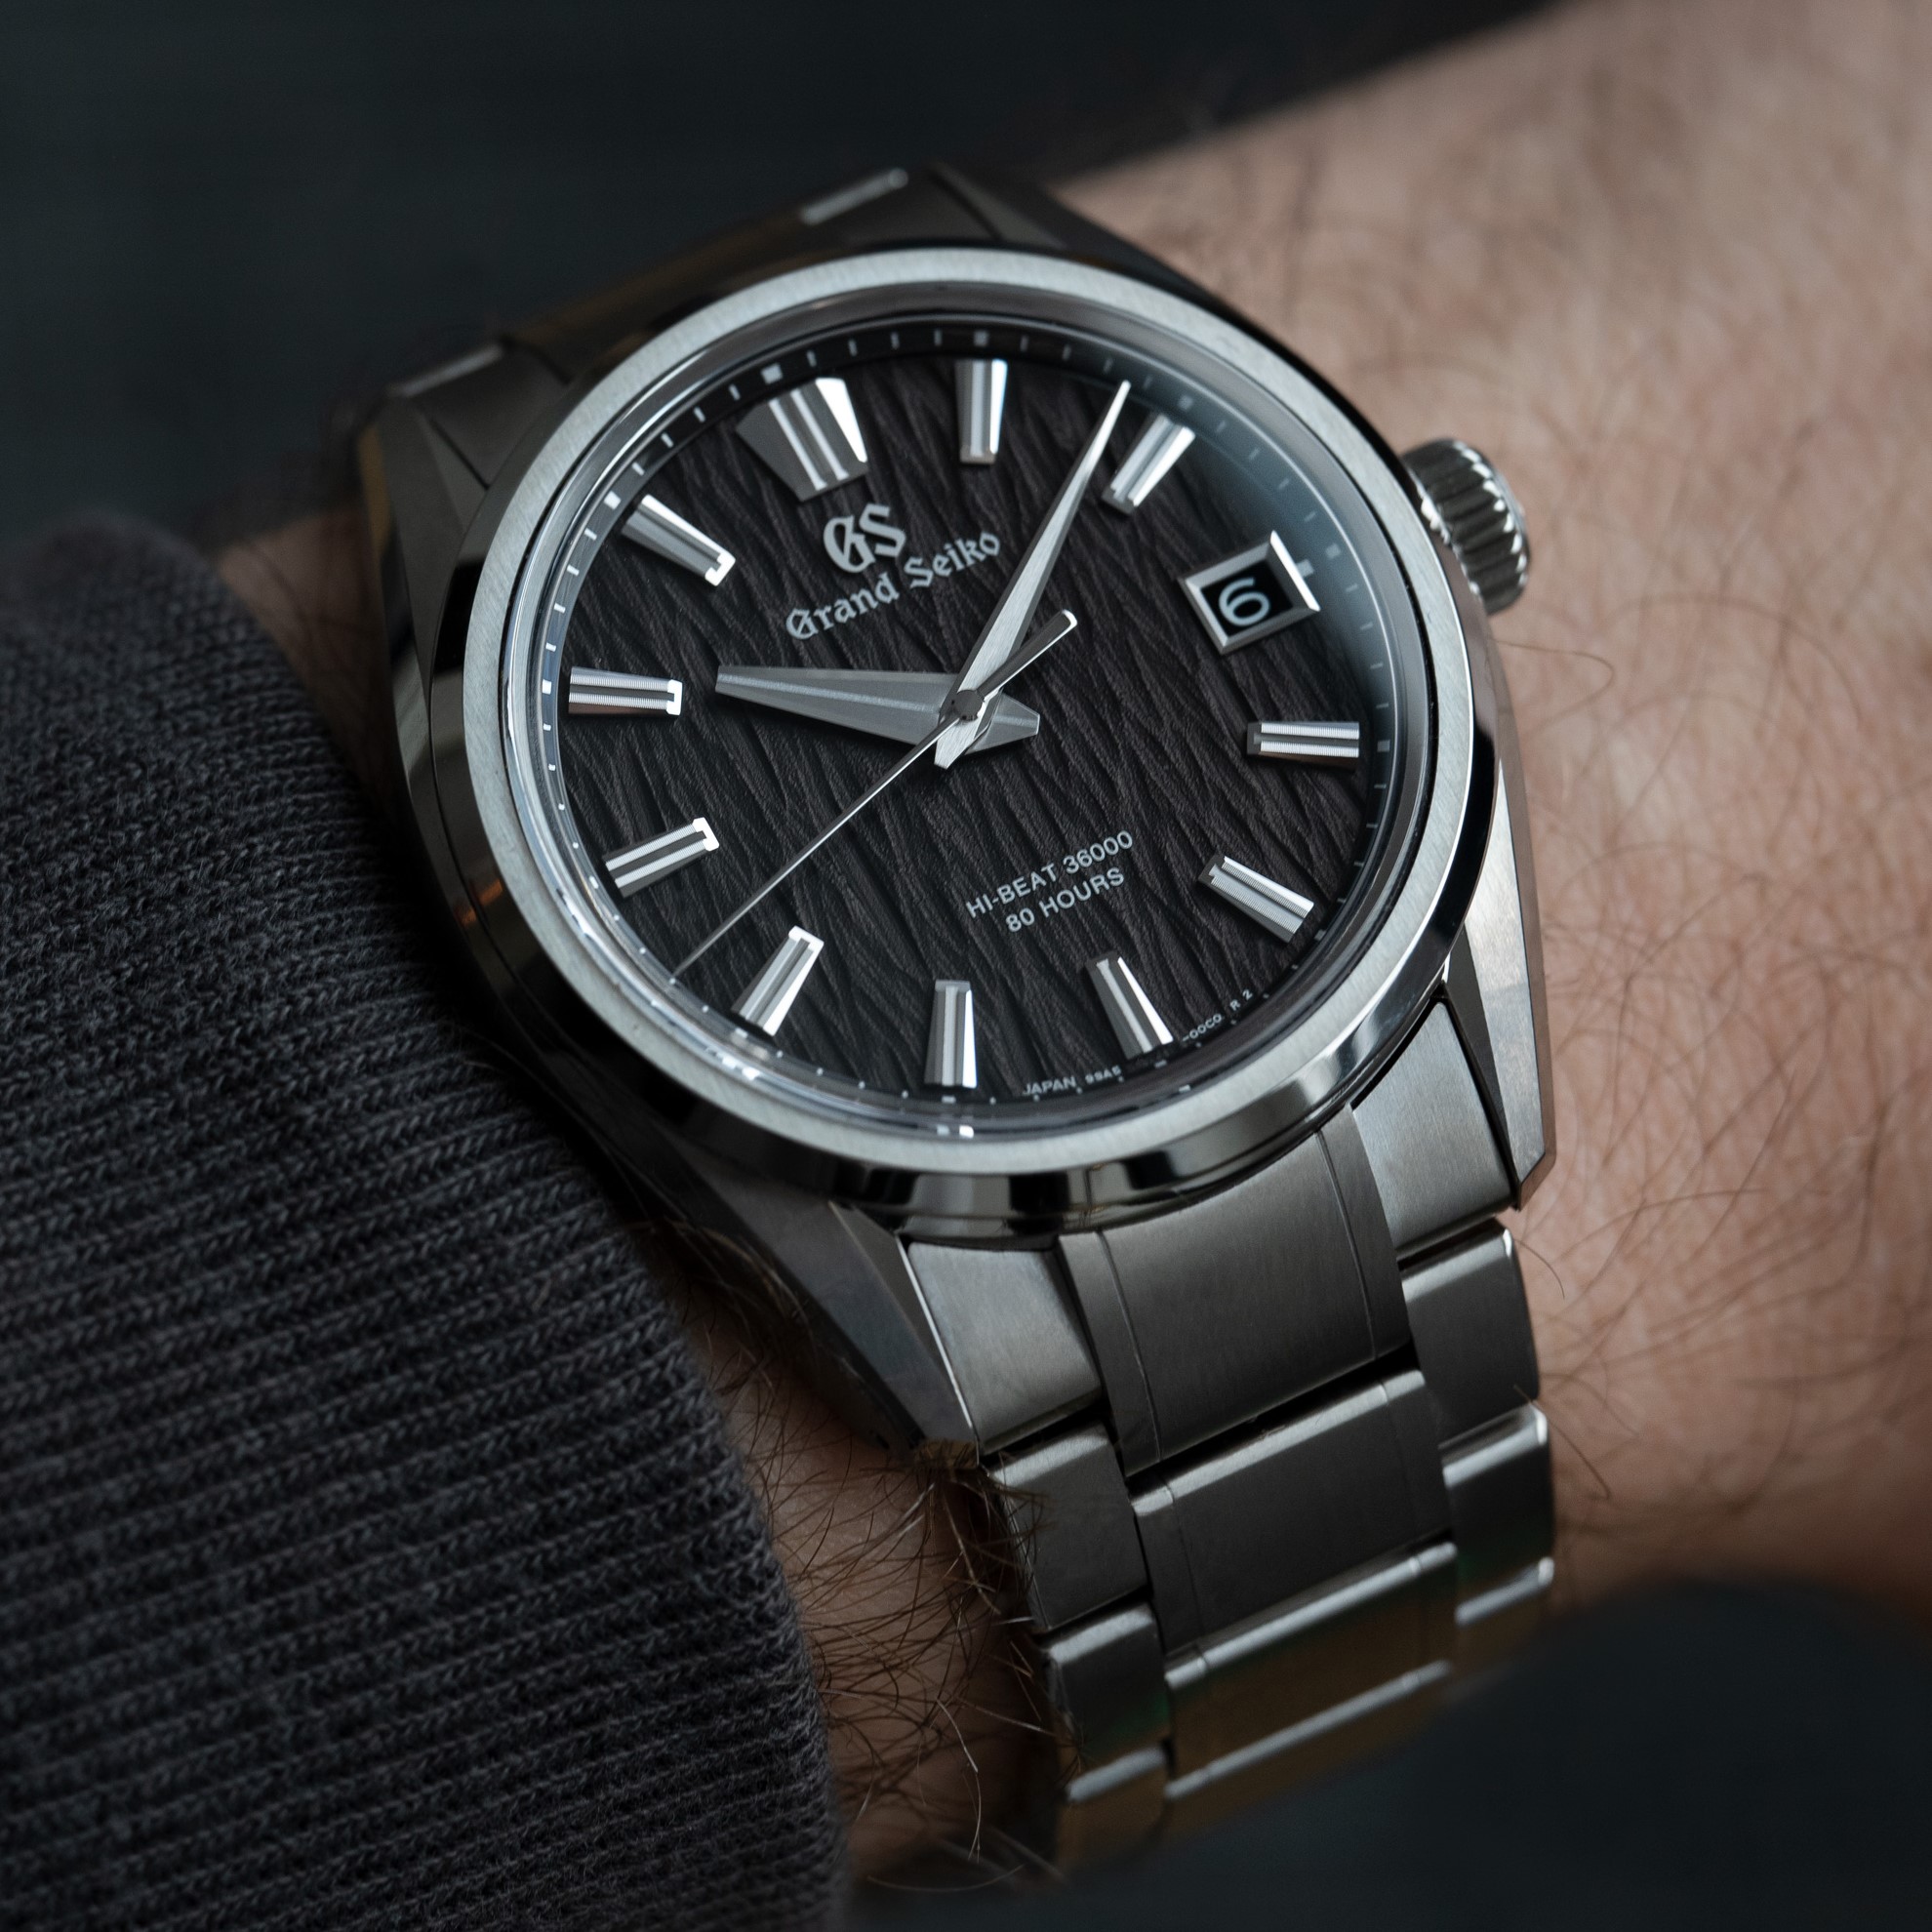 Variation in Black, Presented in Titanium: Grand Seiko Introduces the  “Night Birch” ref. SLGH017 | WatchTime - USA's  Watch Magazine